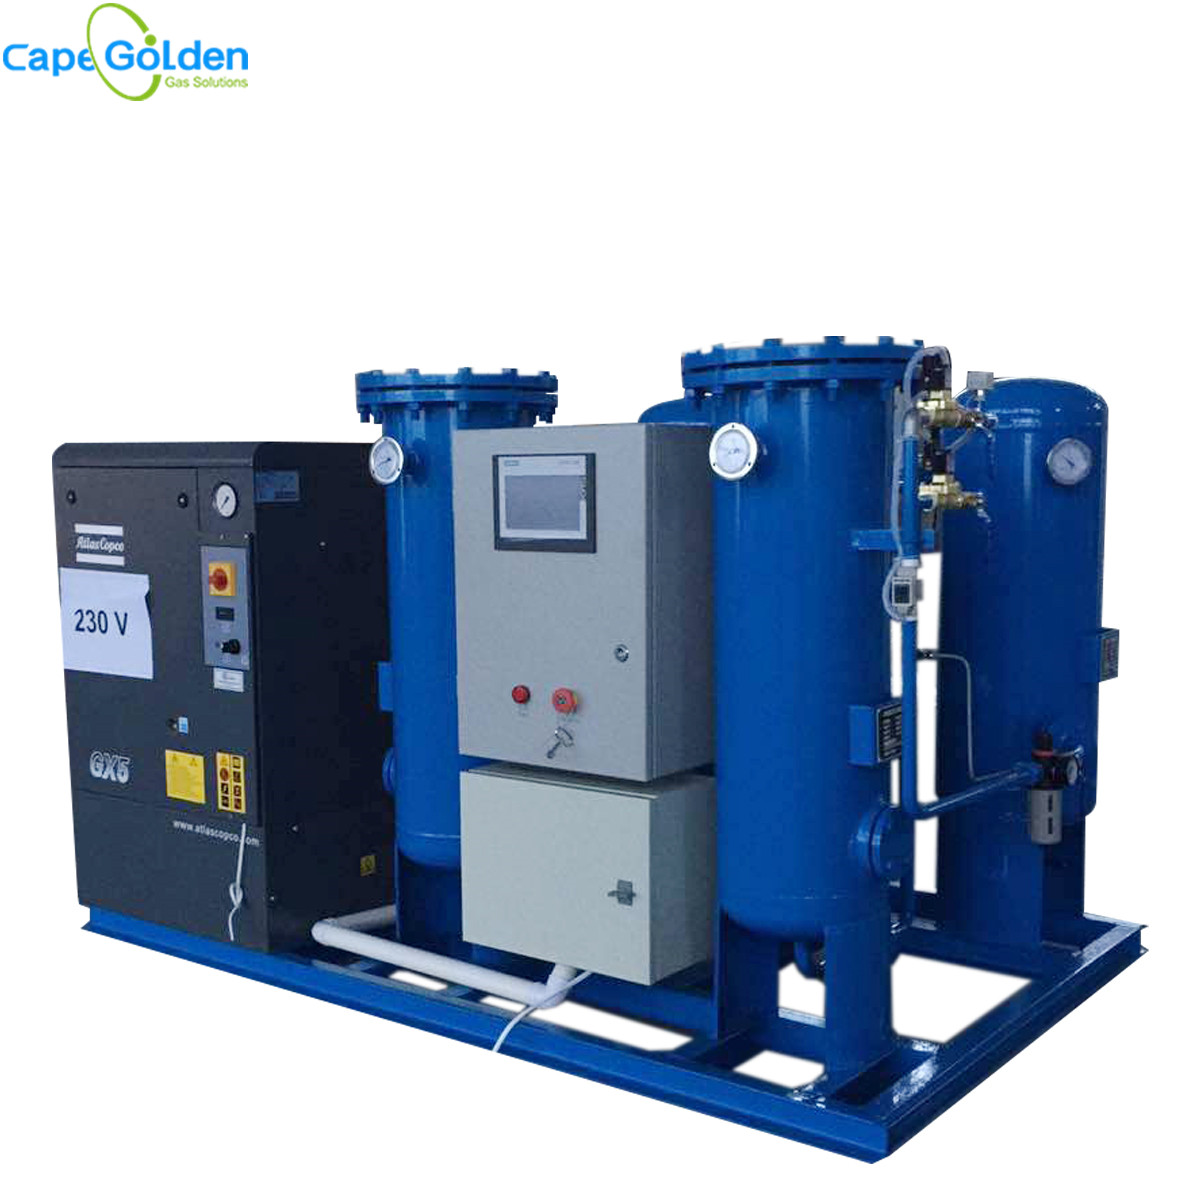 Excellent quality Psa O2 Generator -
 Integrated oxygen generator for filling cylinders – Cape Golden